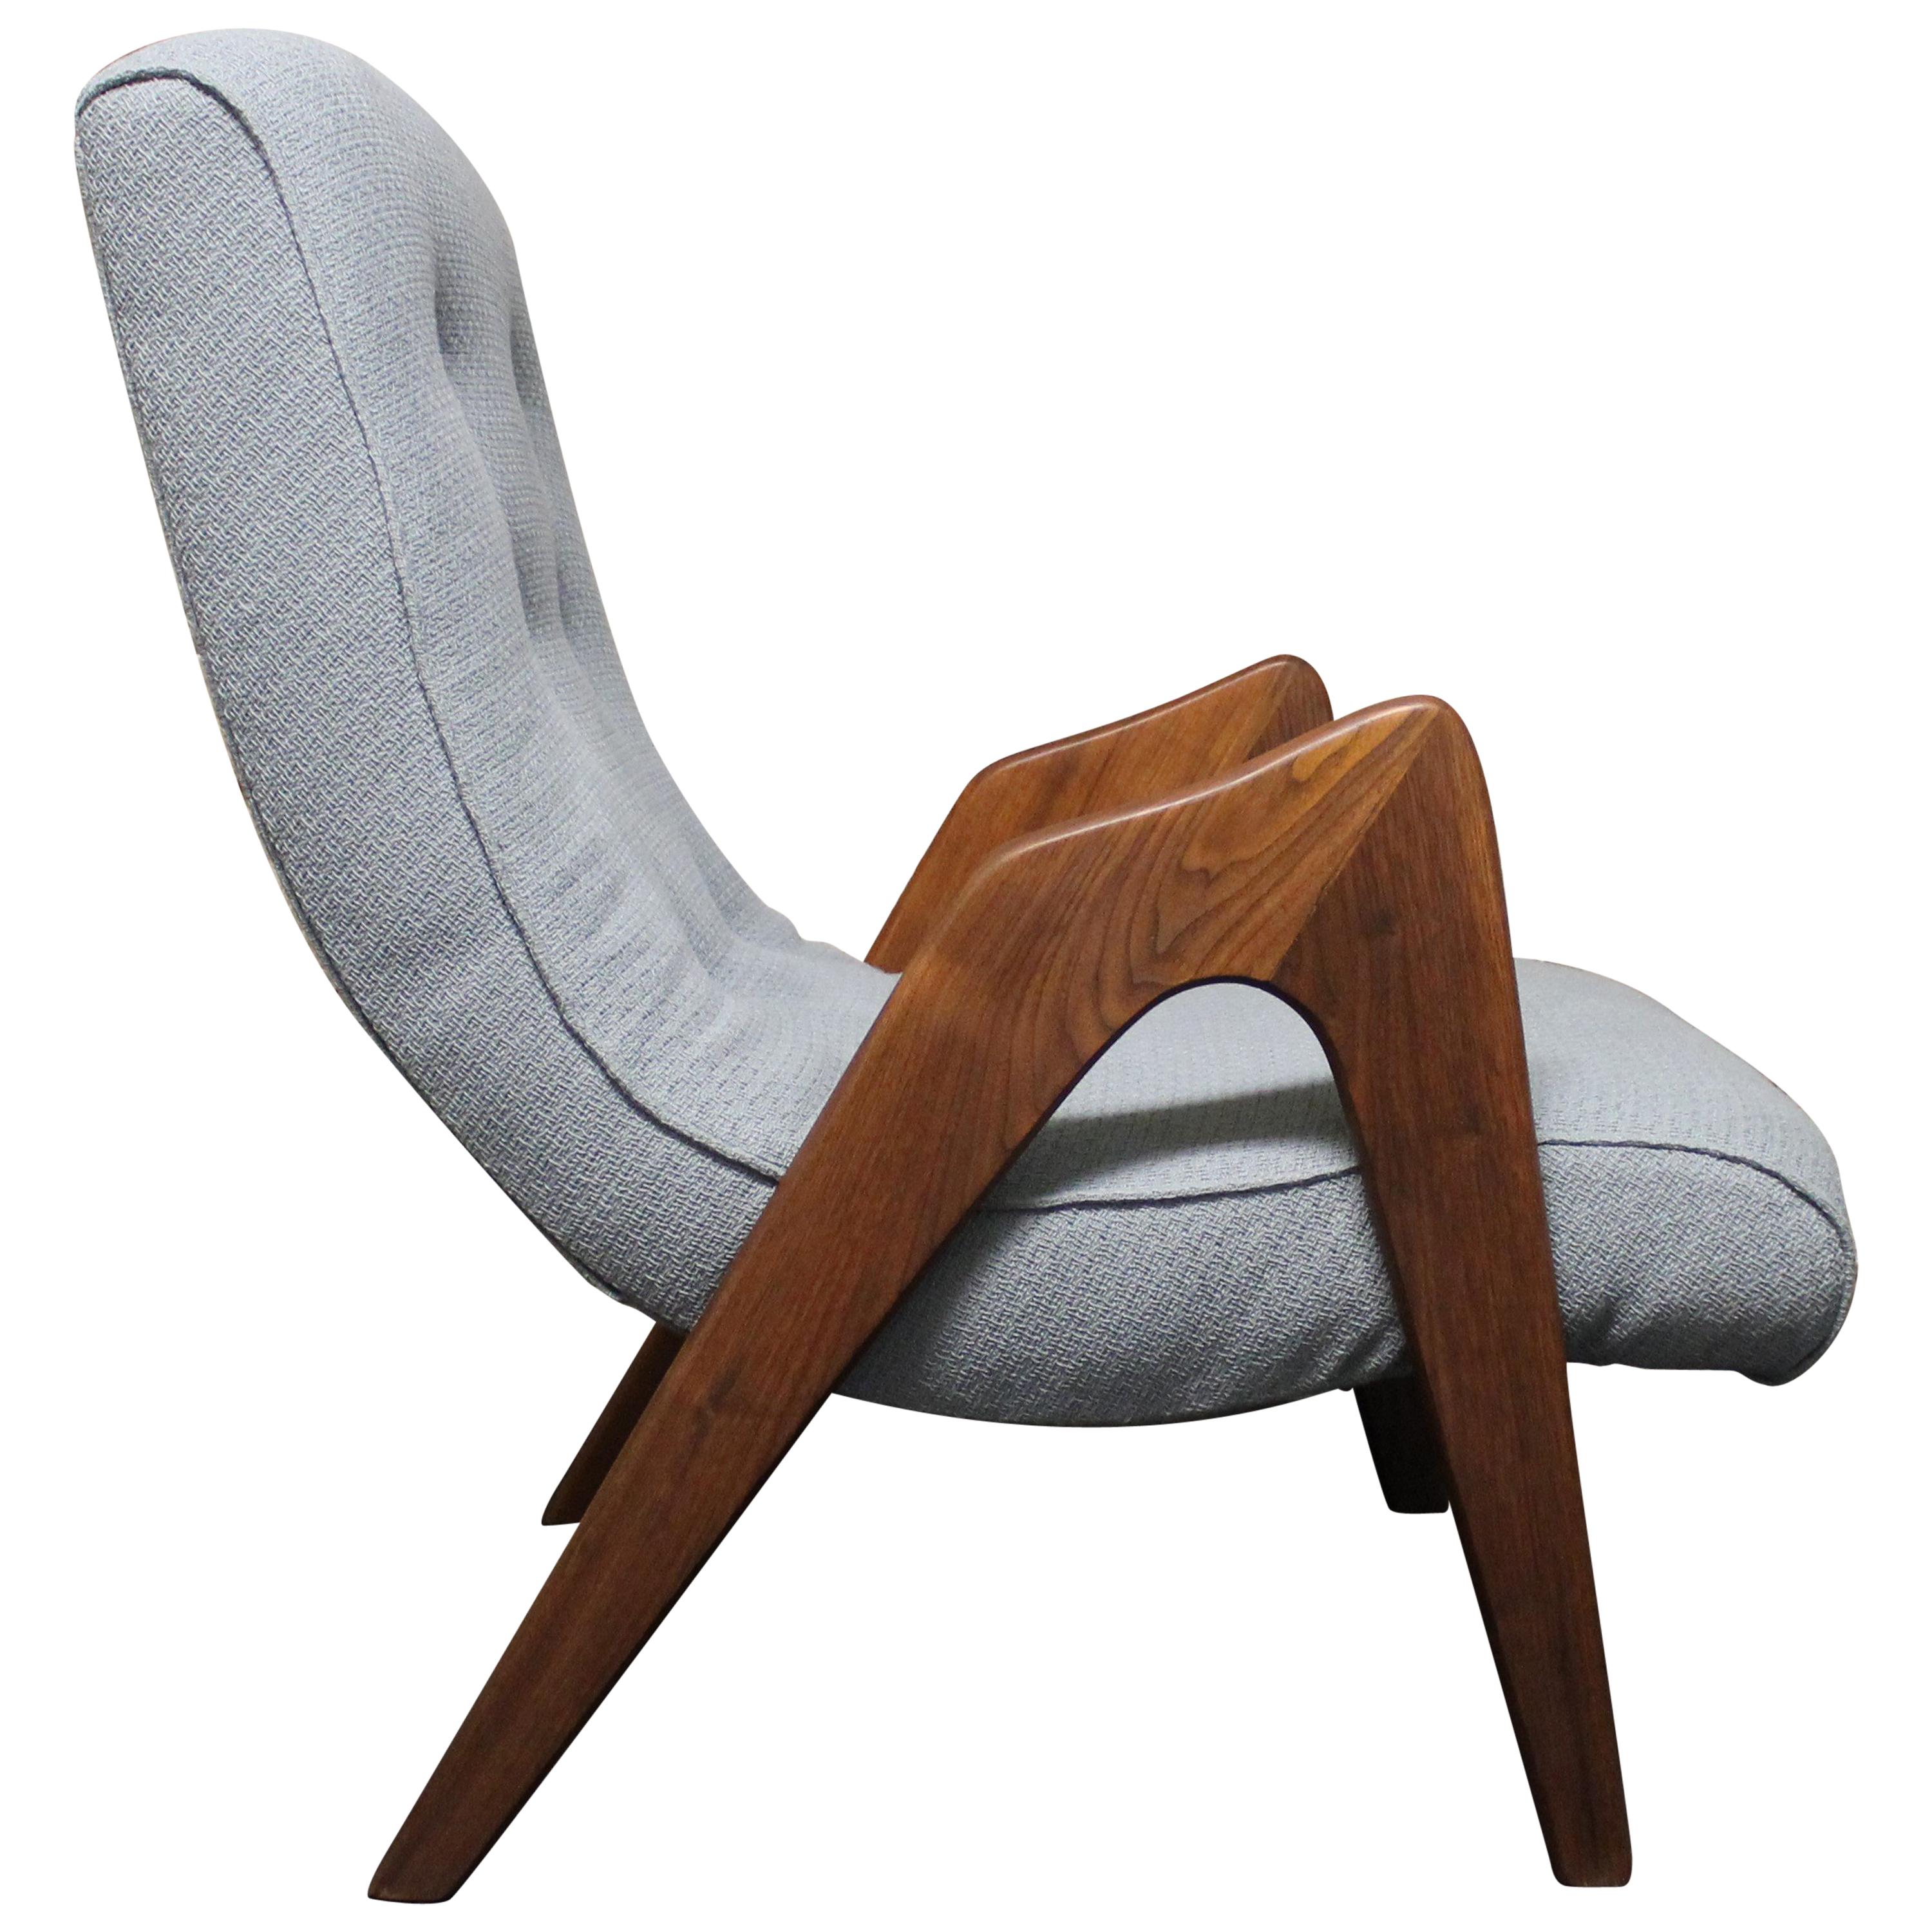 Adrian Pearsall Mid-Century Modern Lounge Chair for Craft Associates